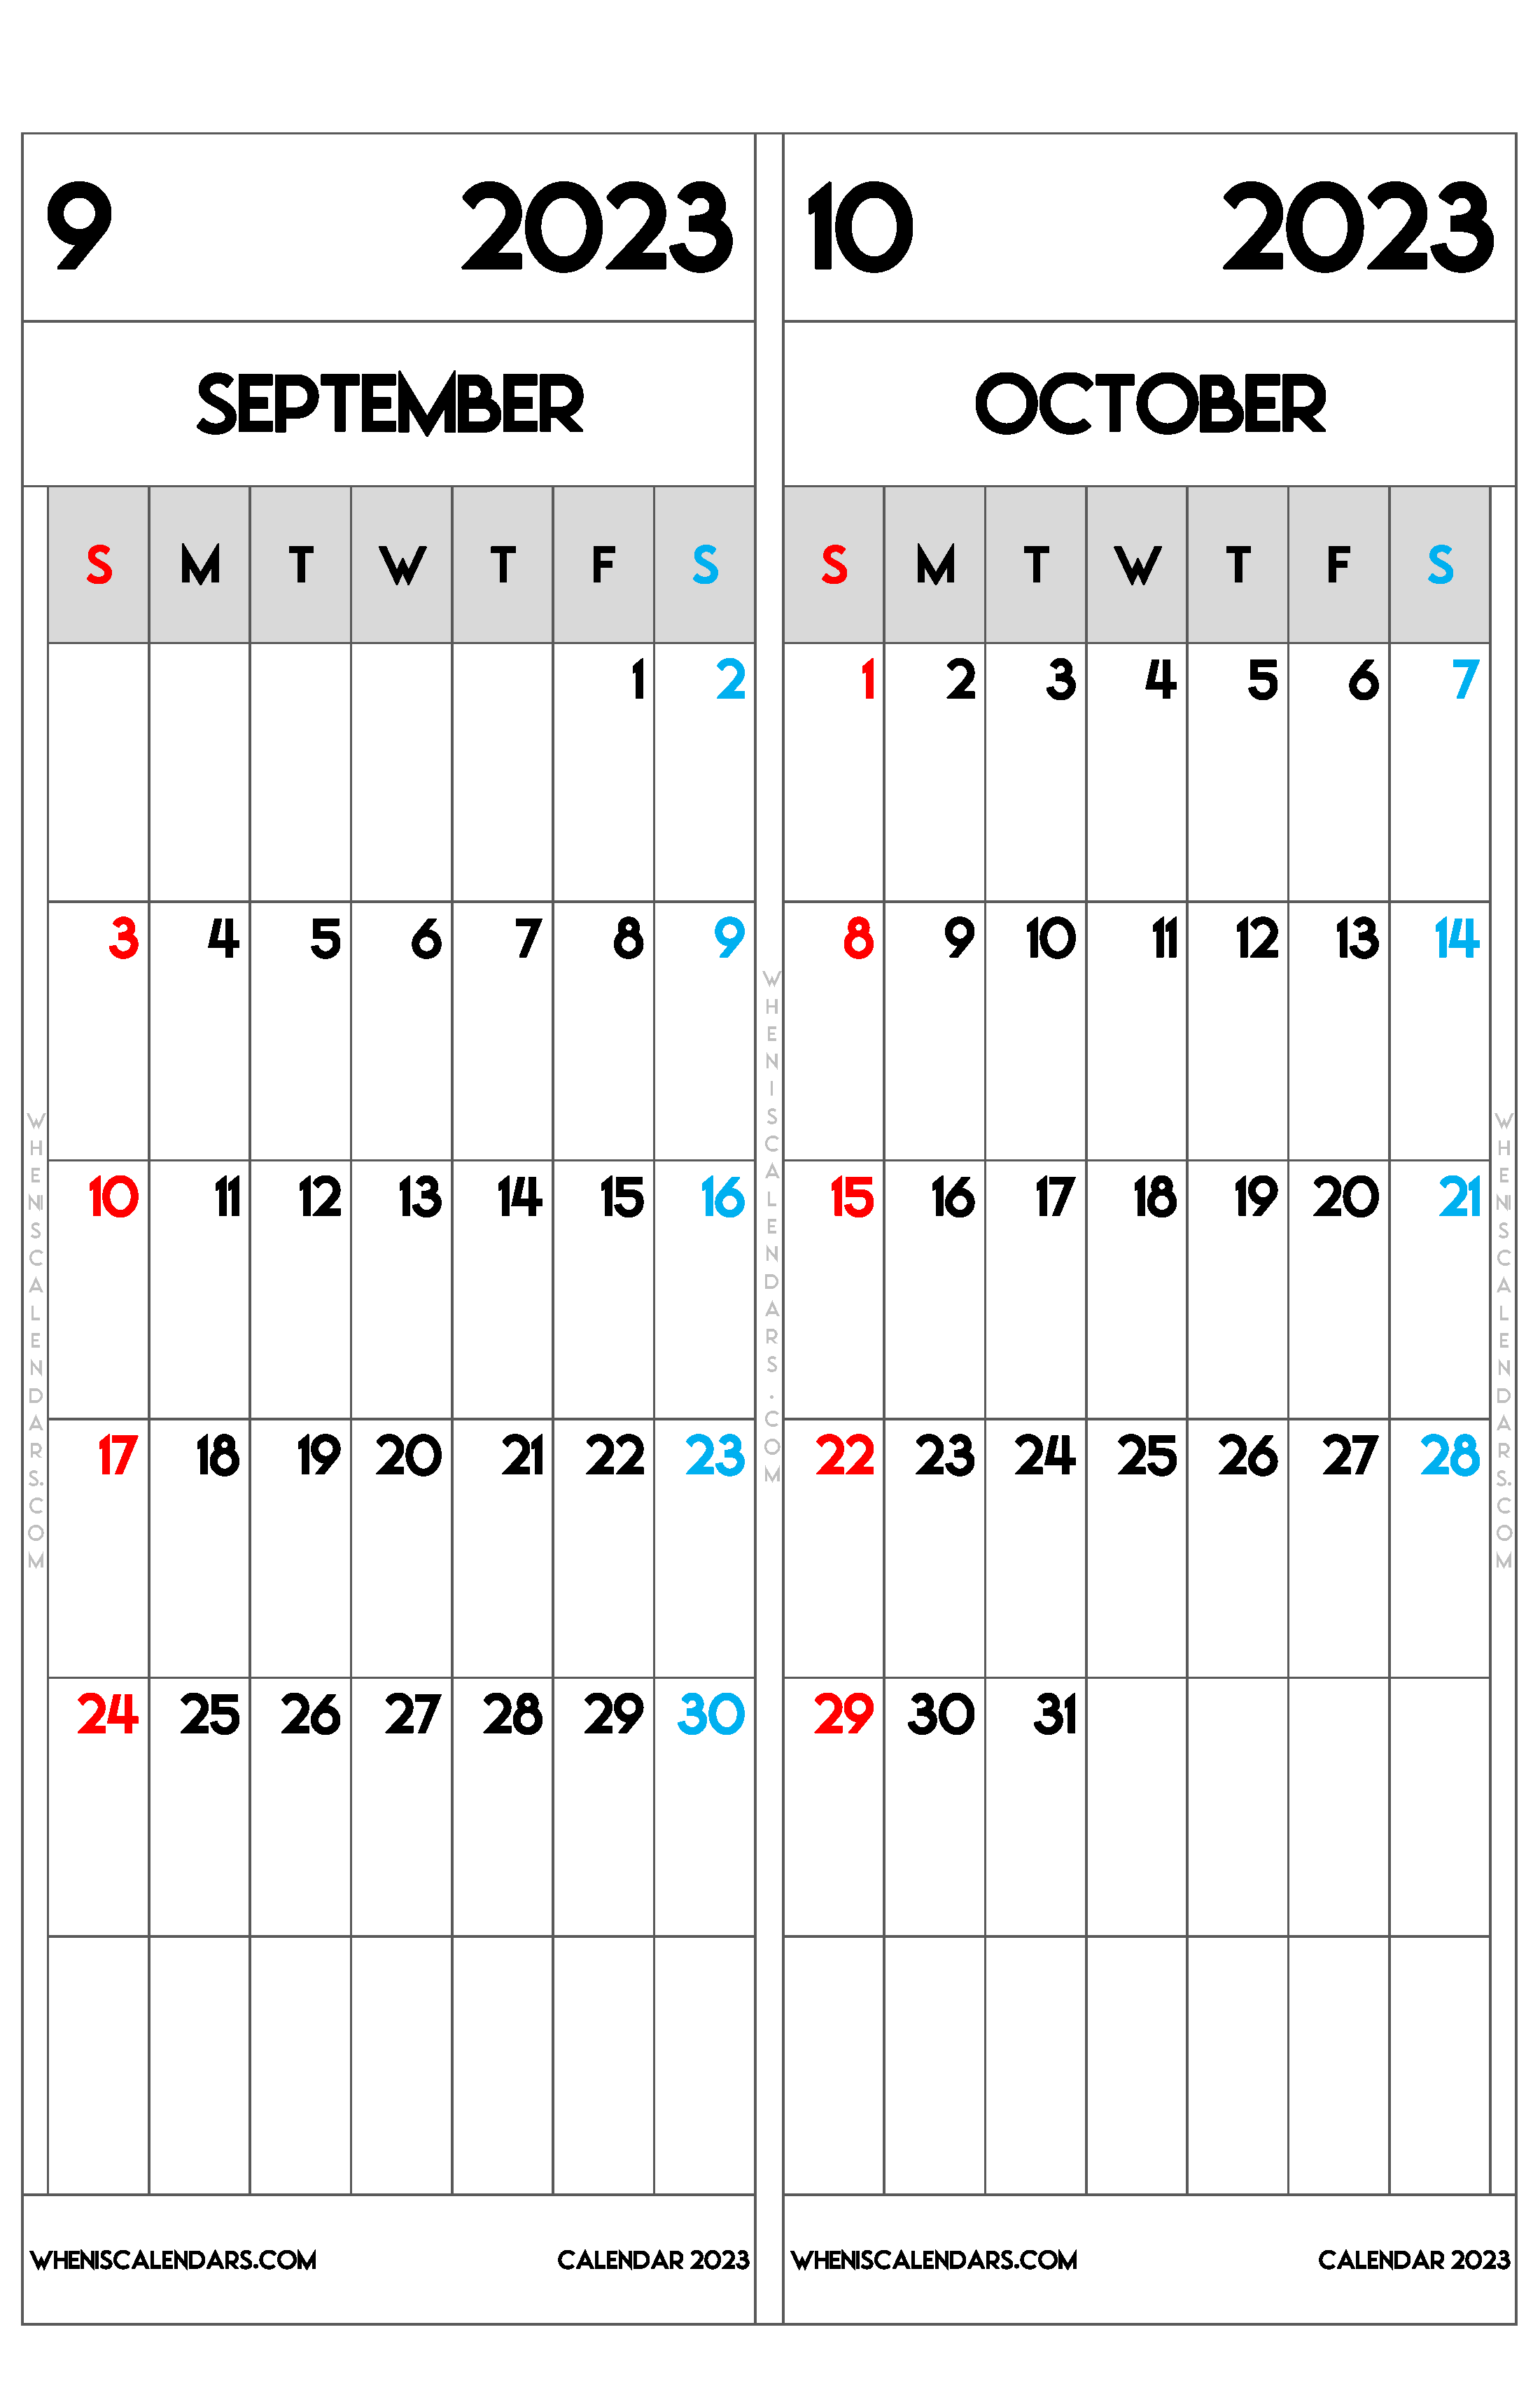 Download Printable September and October 2023 Calendar as PDF and PNG Image